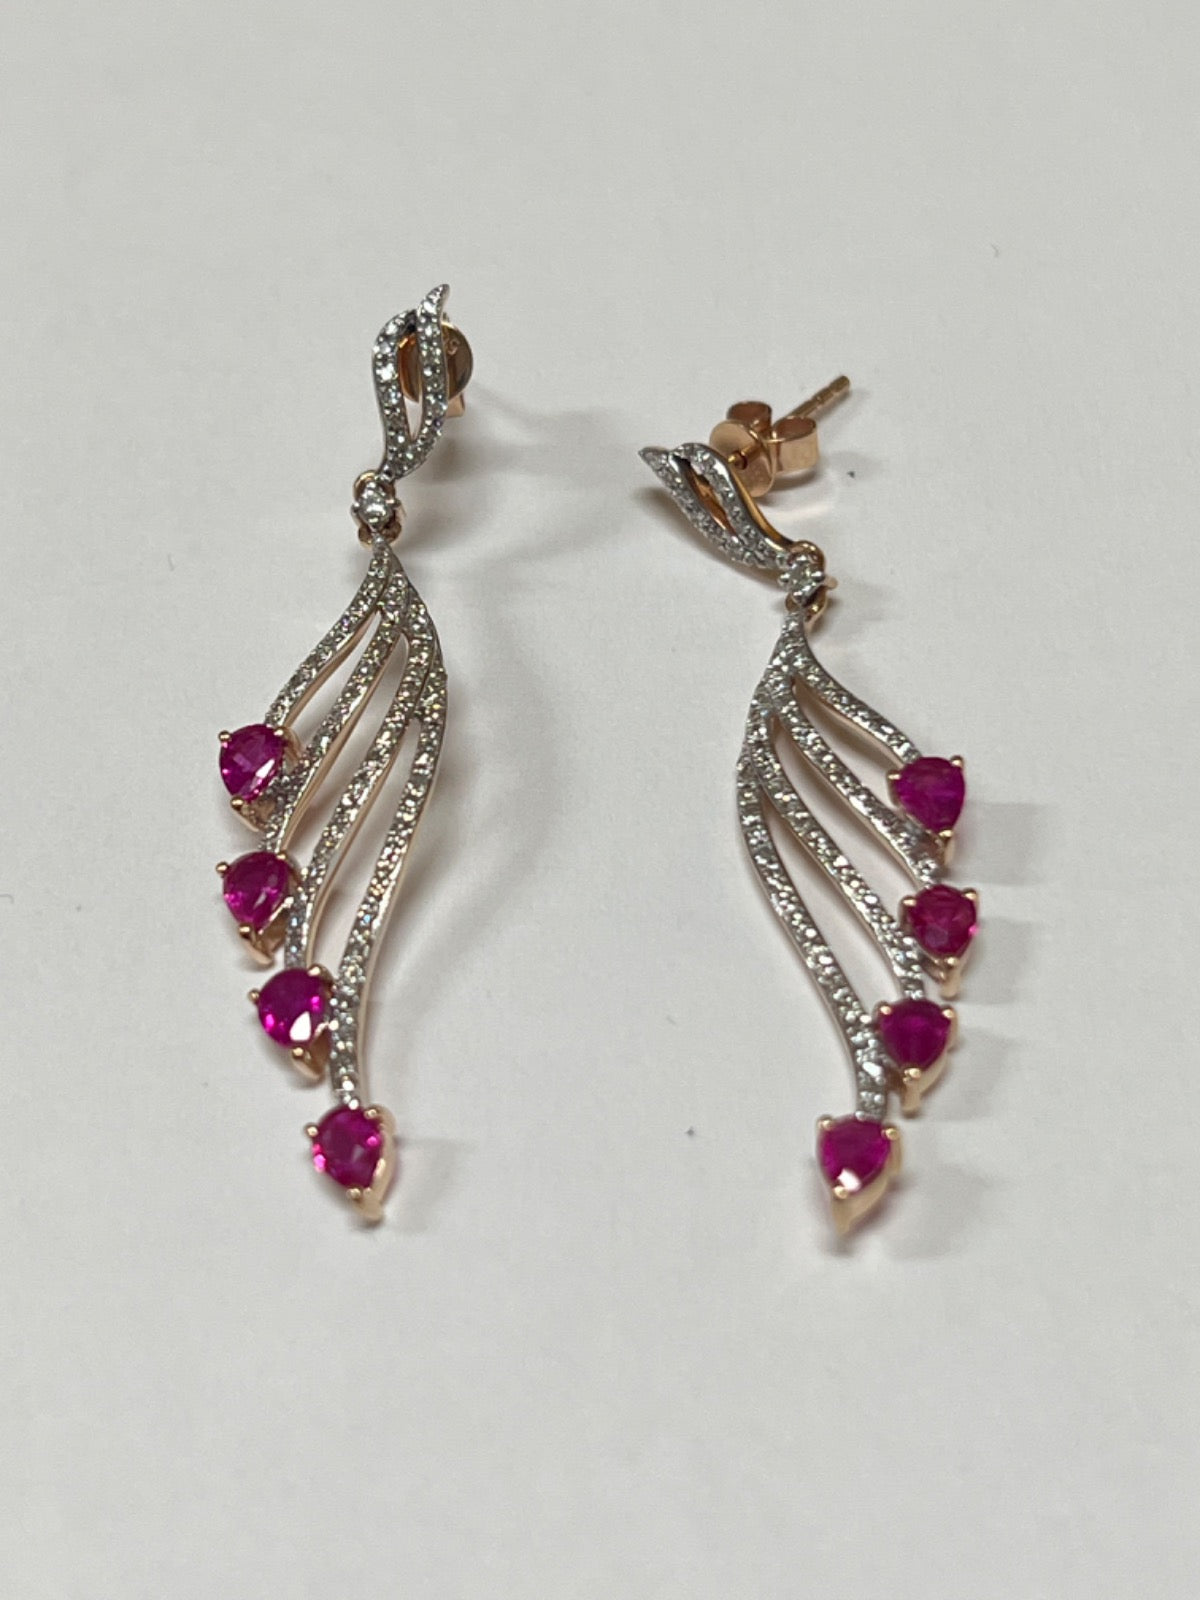 18K Rose Gold 18k Gold Diamond and Pink Sapphire Earrings  Earring with Diamond and Sapphire